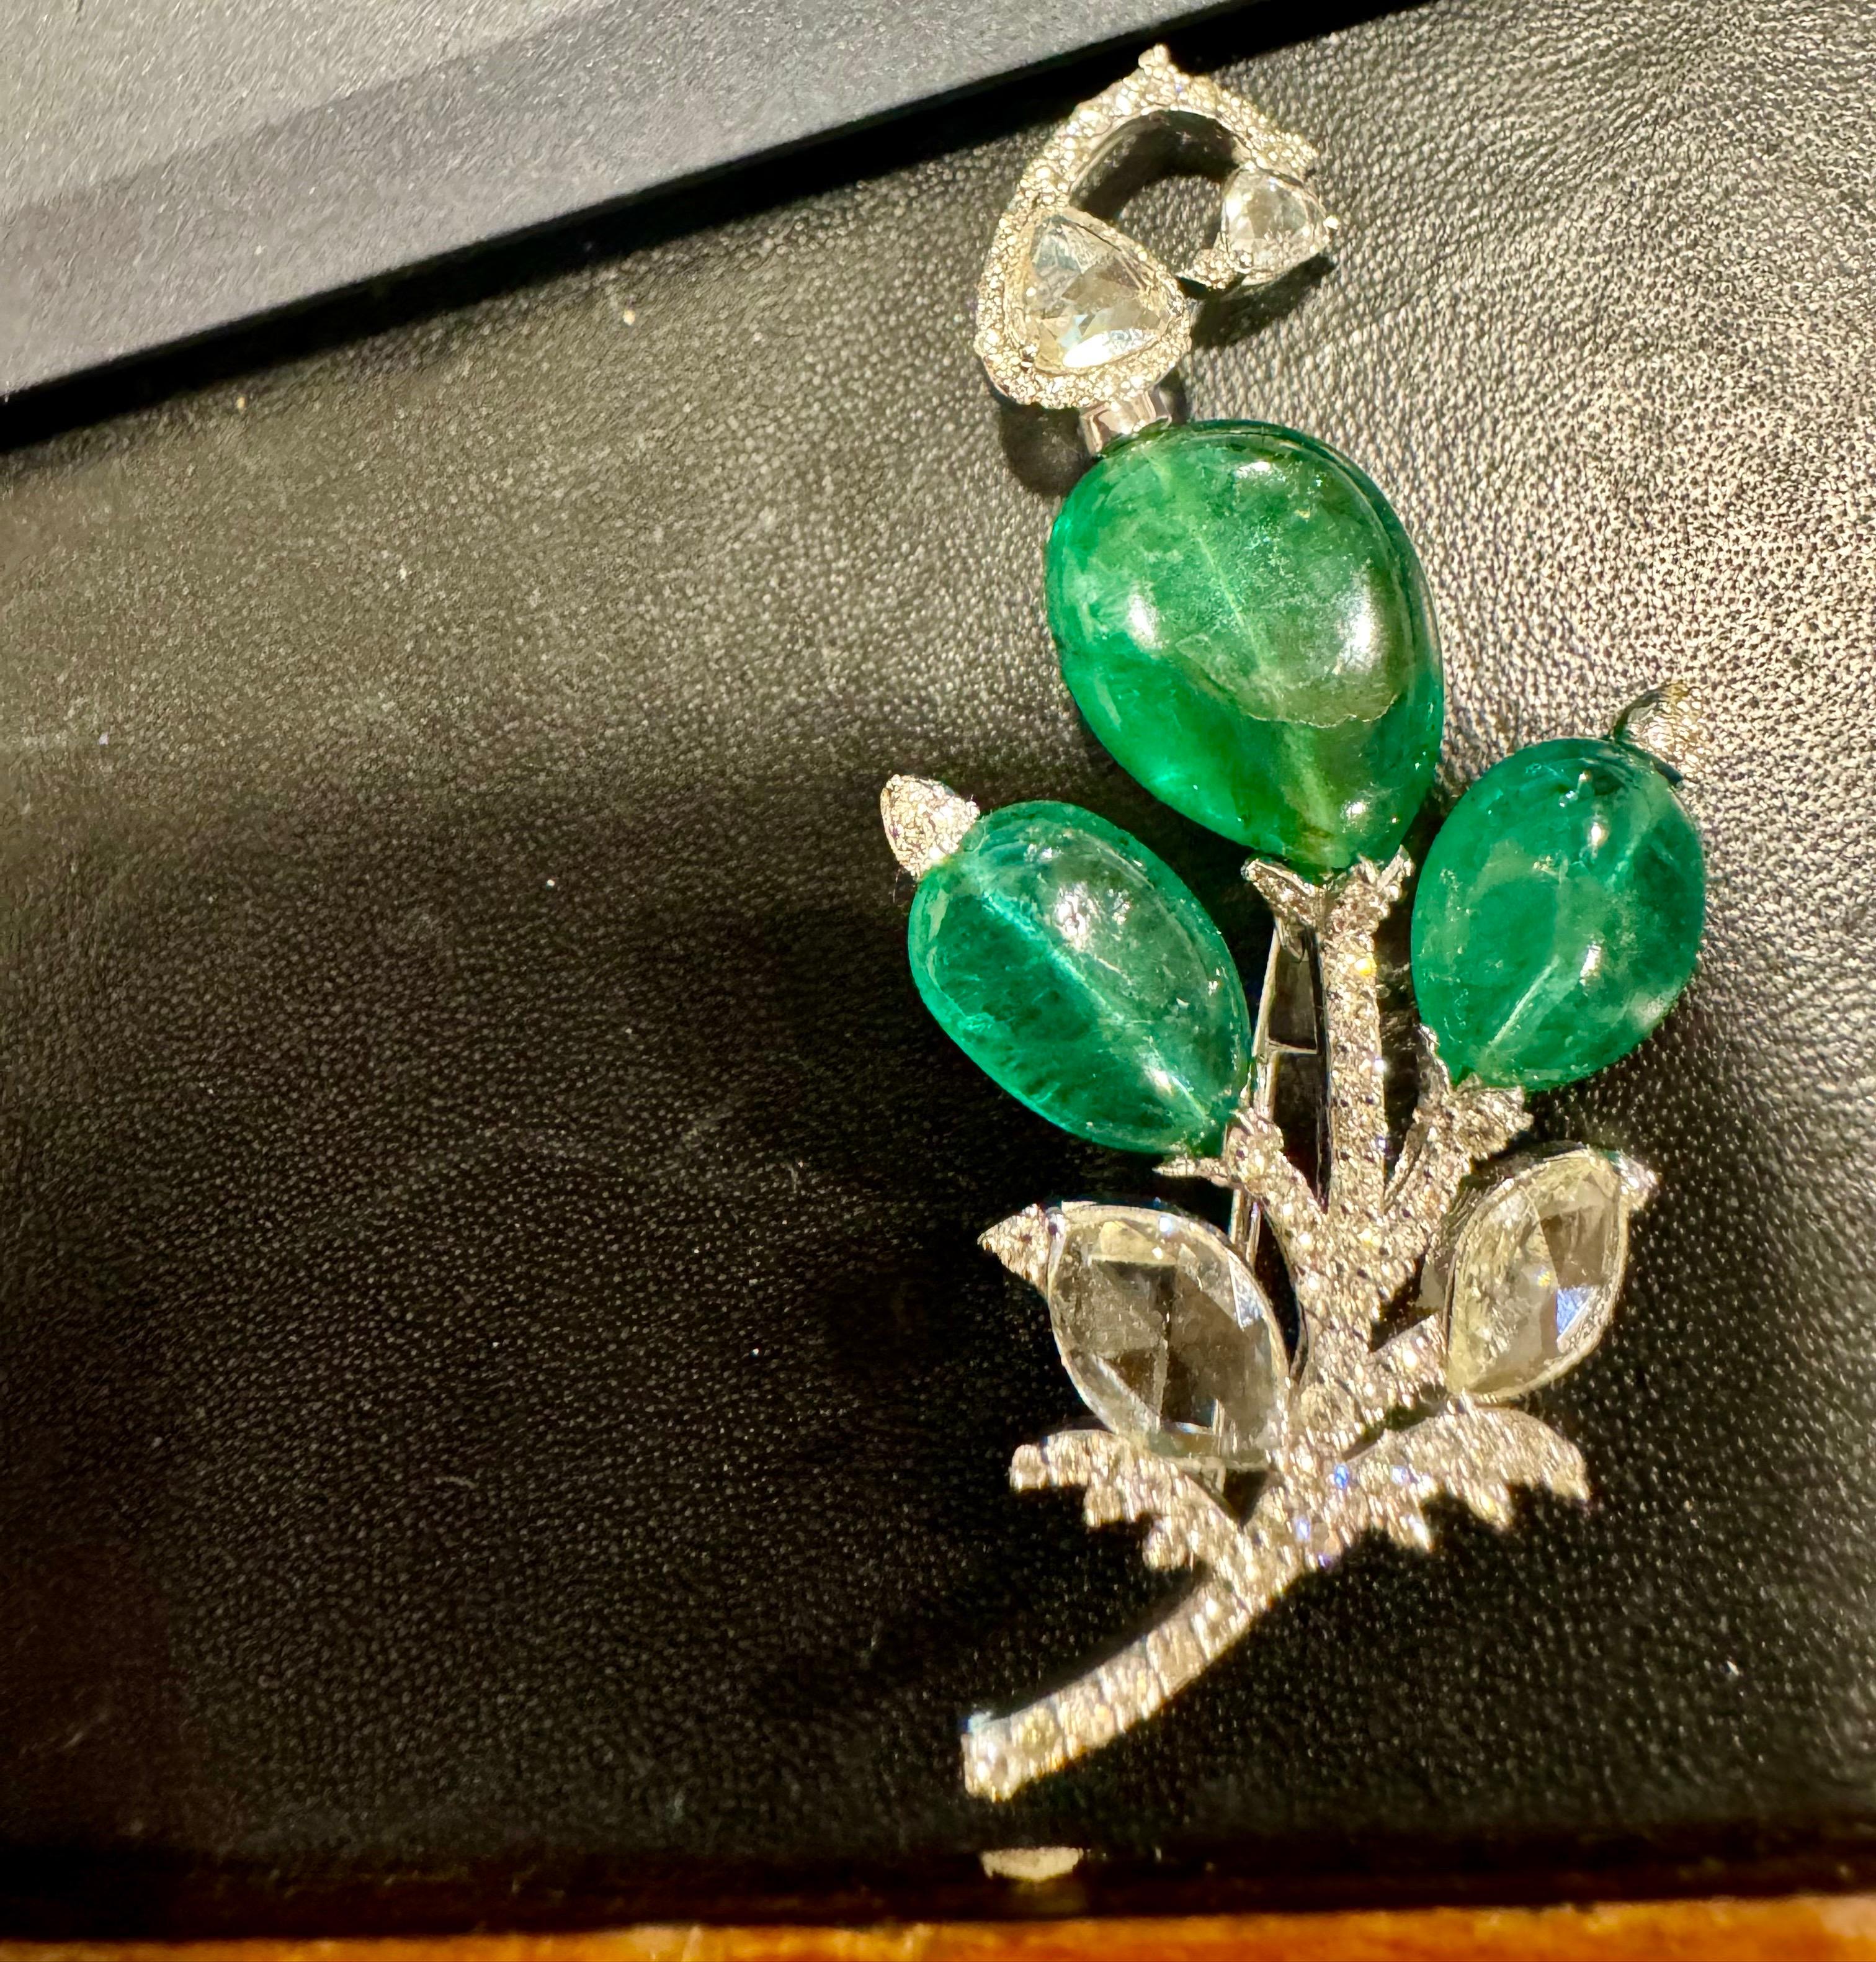 8.5 Ct Natural Oval Emerald Bead & 4 Ct Rose cut Diamond Brooch/Pin in 18 Karat white Gold. The approximate weight of the three emeralds is about 8 carats. The 18 Karat Gold weight is 7.5 grams, and the emeralds originate from Zambia. This exquisite